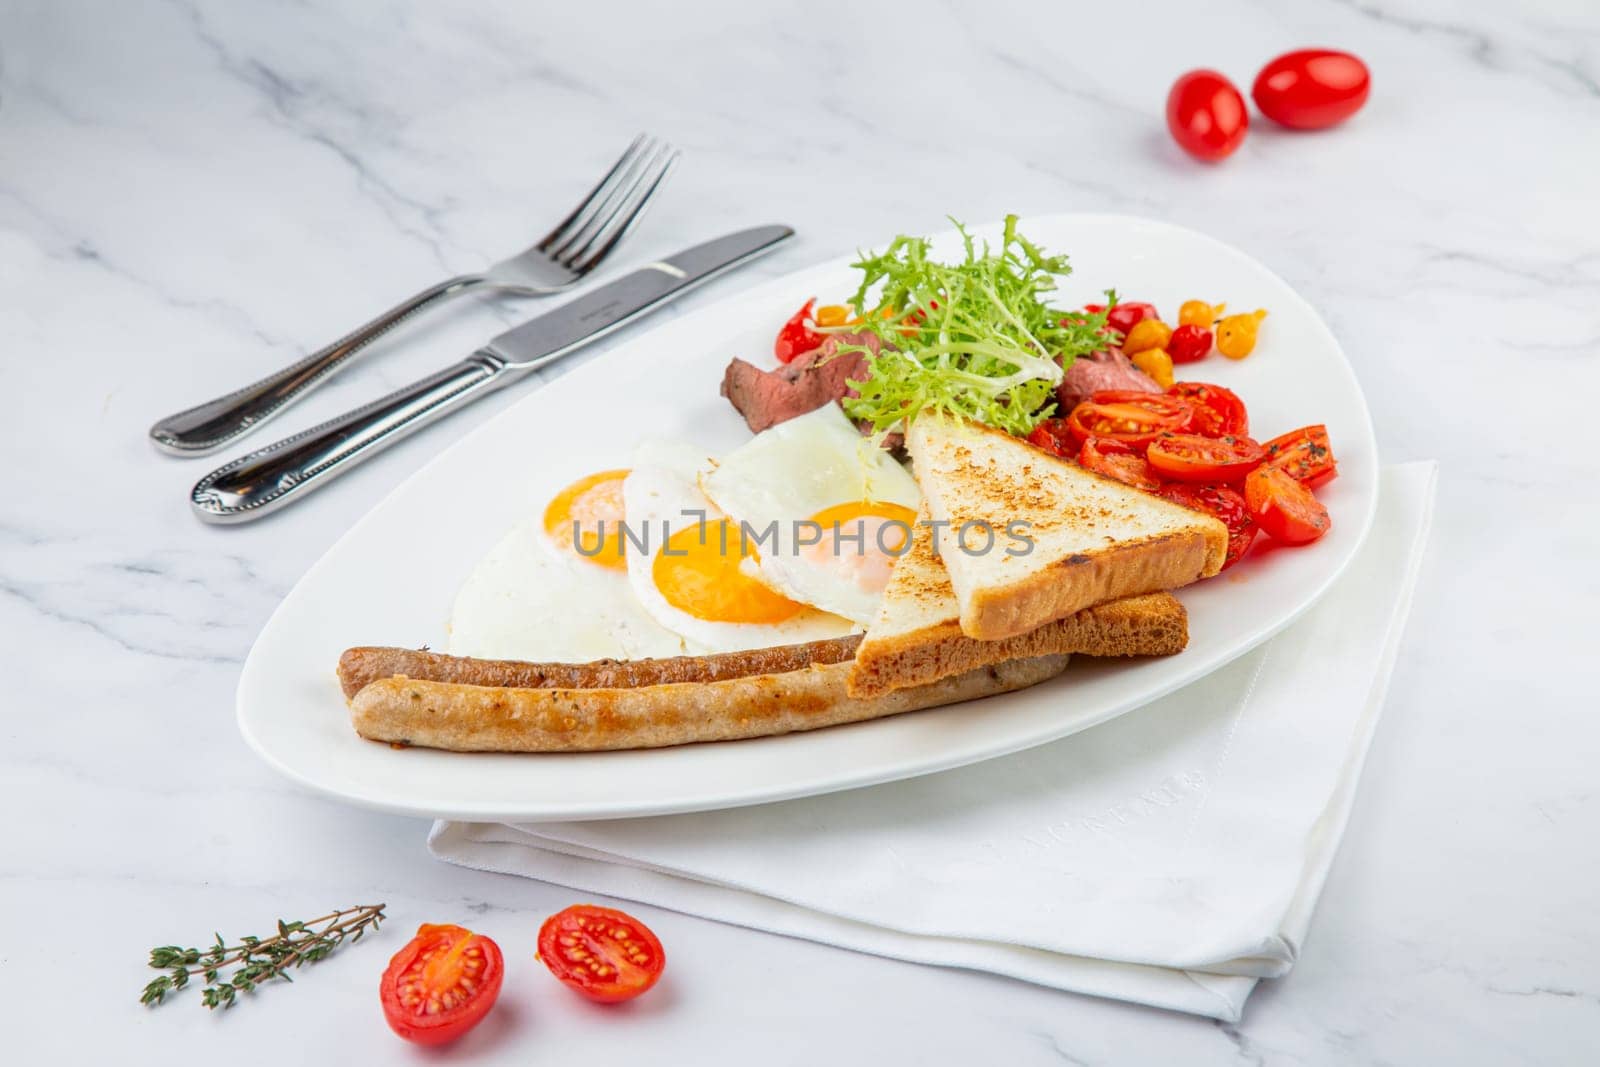 scrambled eggs with vegetables, cherry tomatoes, bread, herbs and sausages